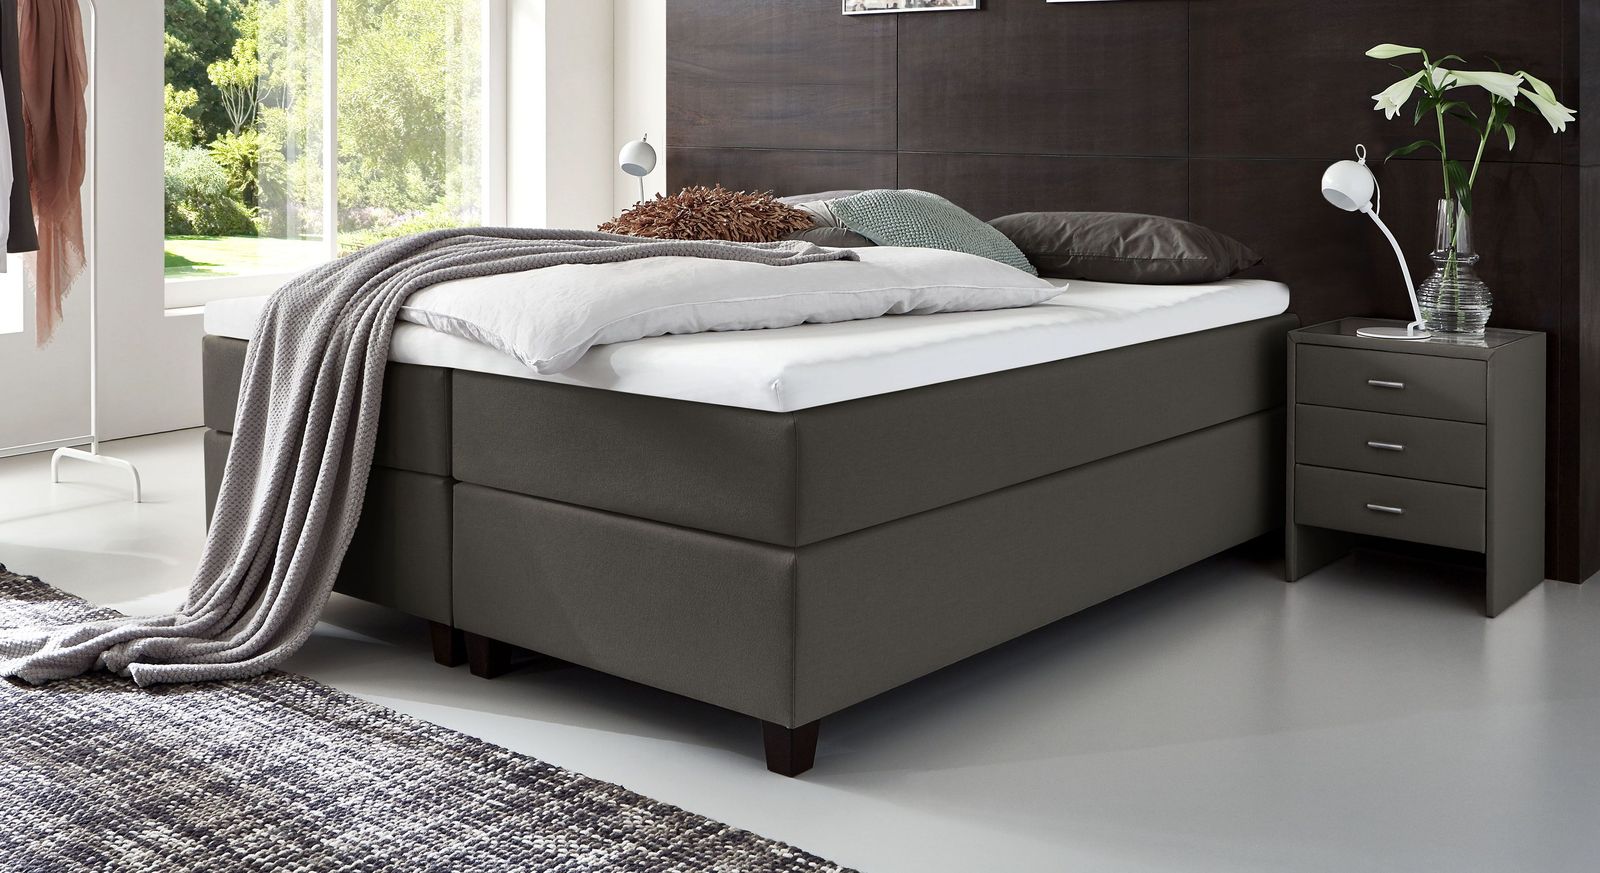 66 cm hohe Boxspringliege Luciano aus Webstoff in Anthrazit